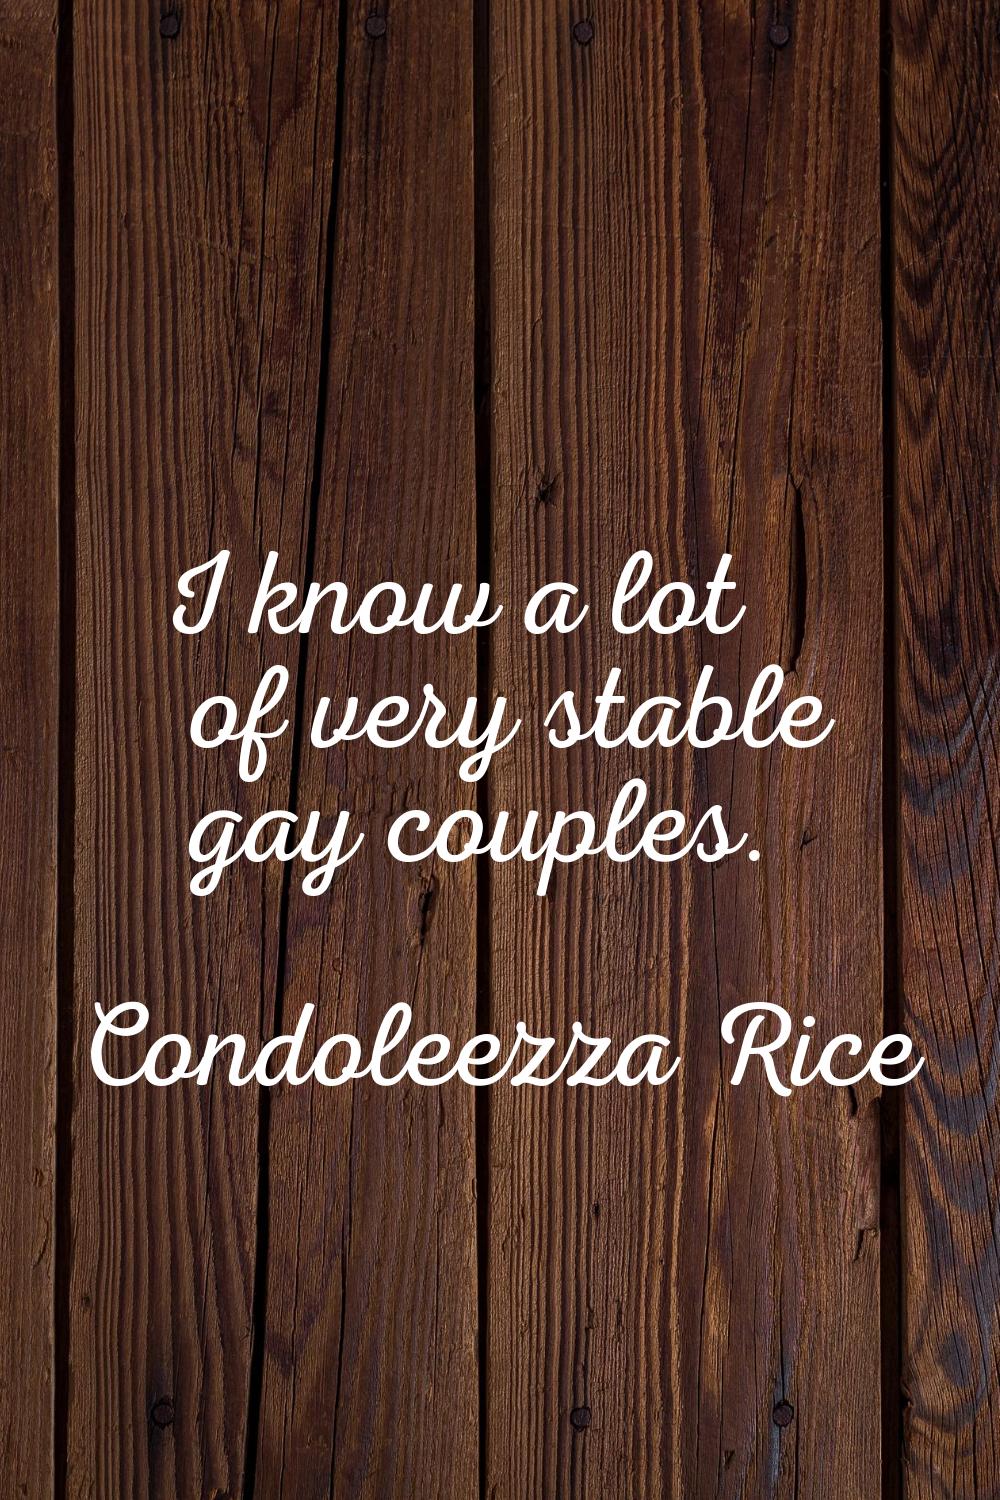 I know a lot of very stable gay couples.